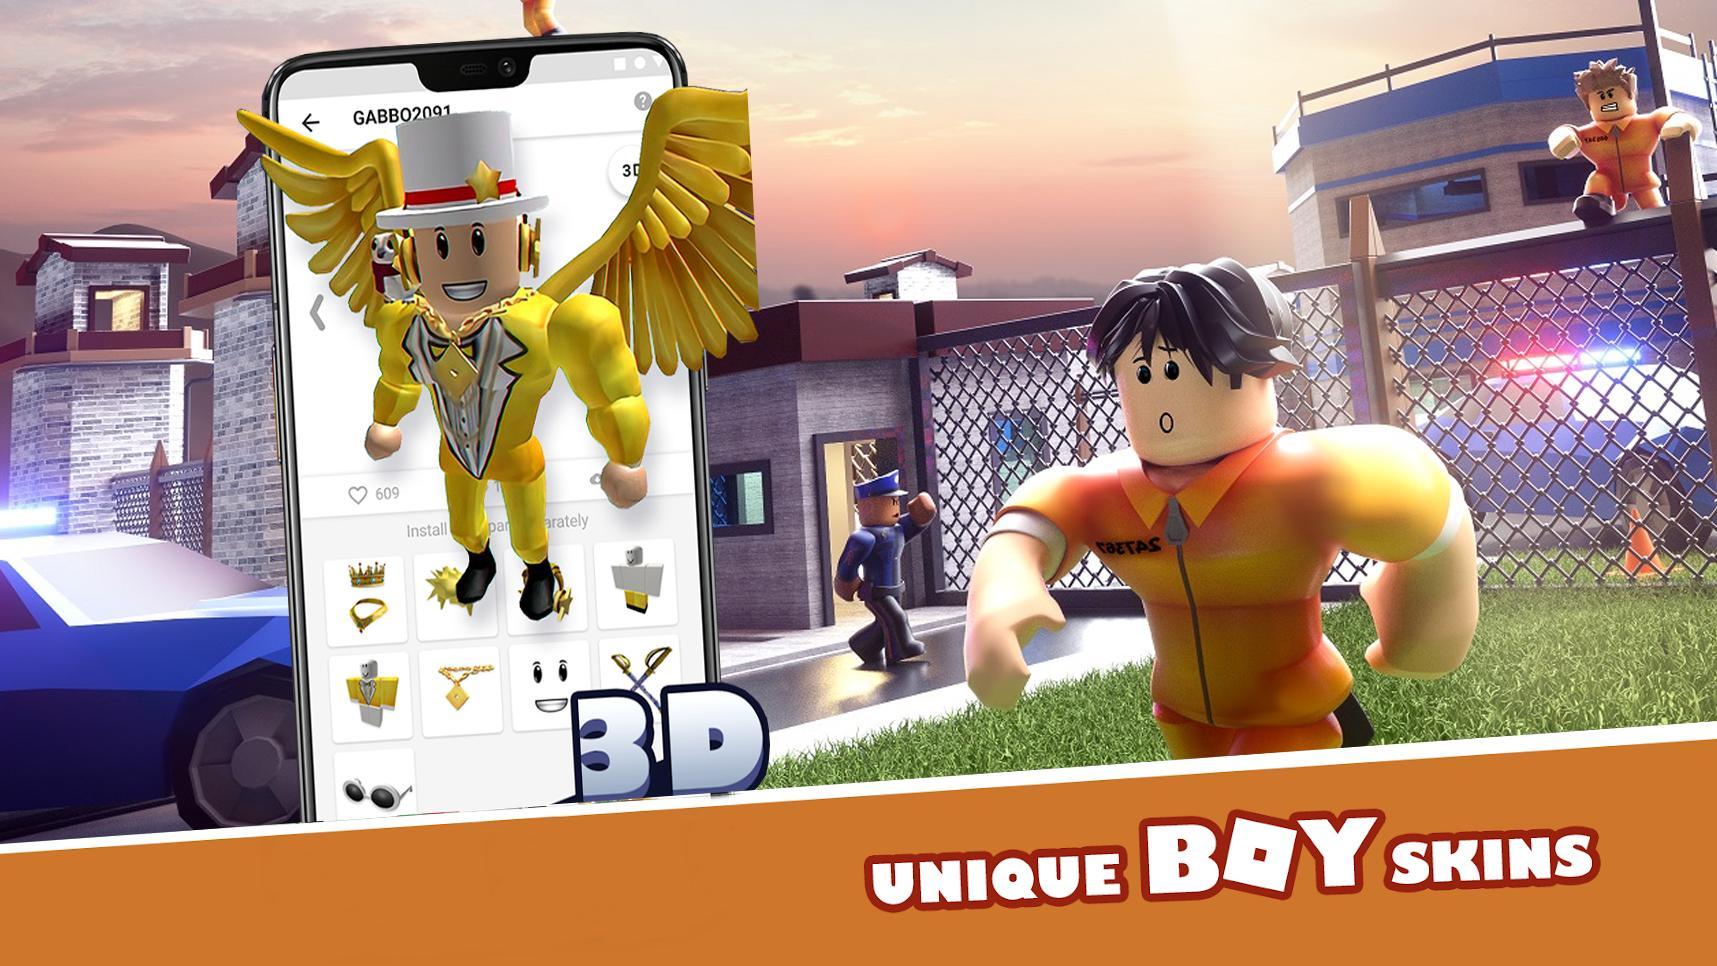 Master skins for Roblox – Apps no Google Play